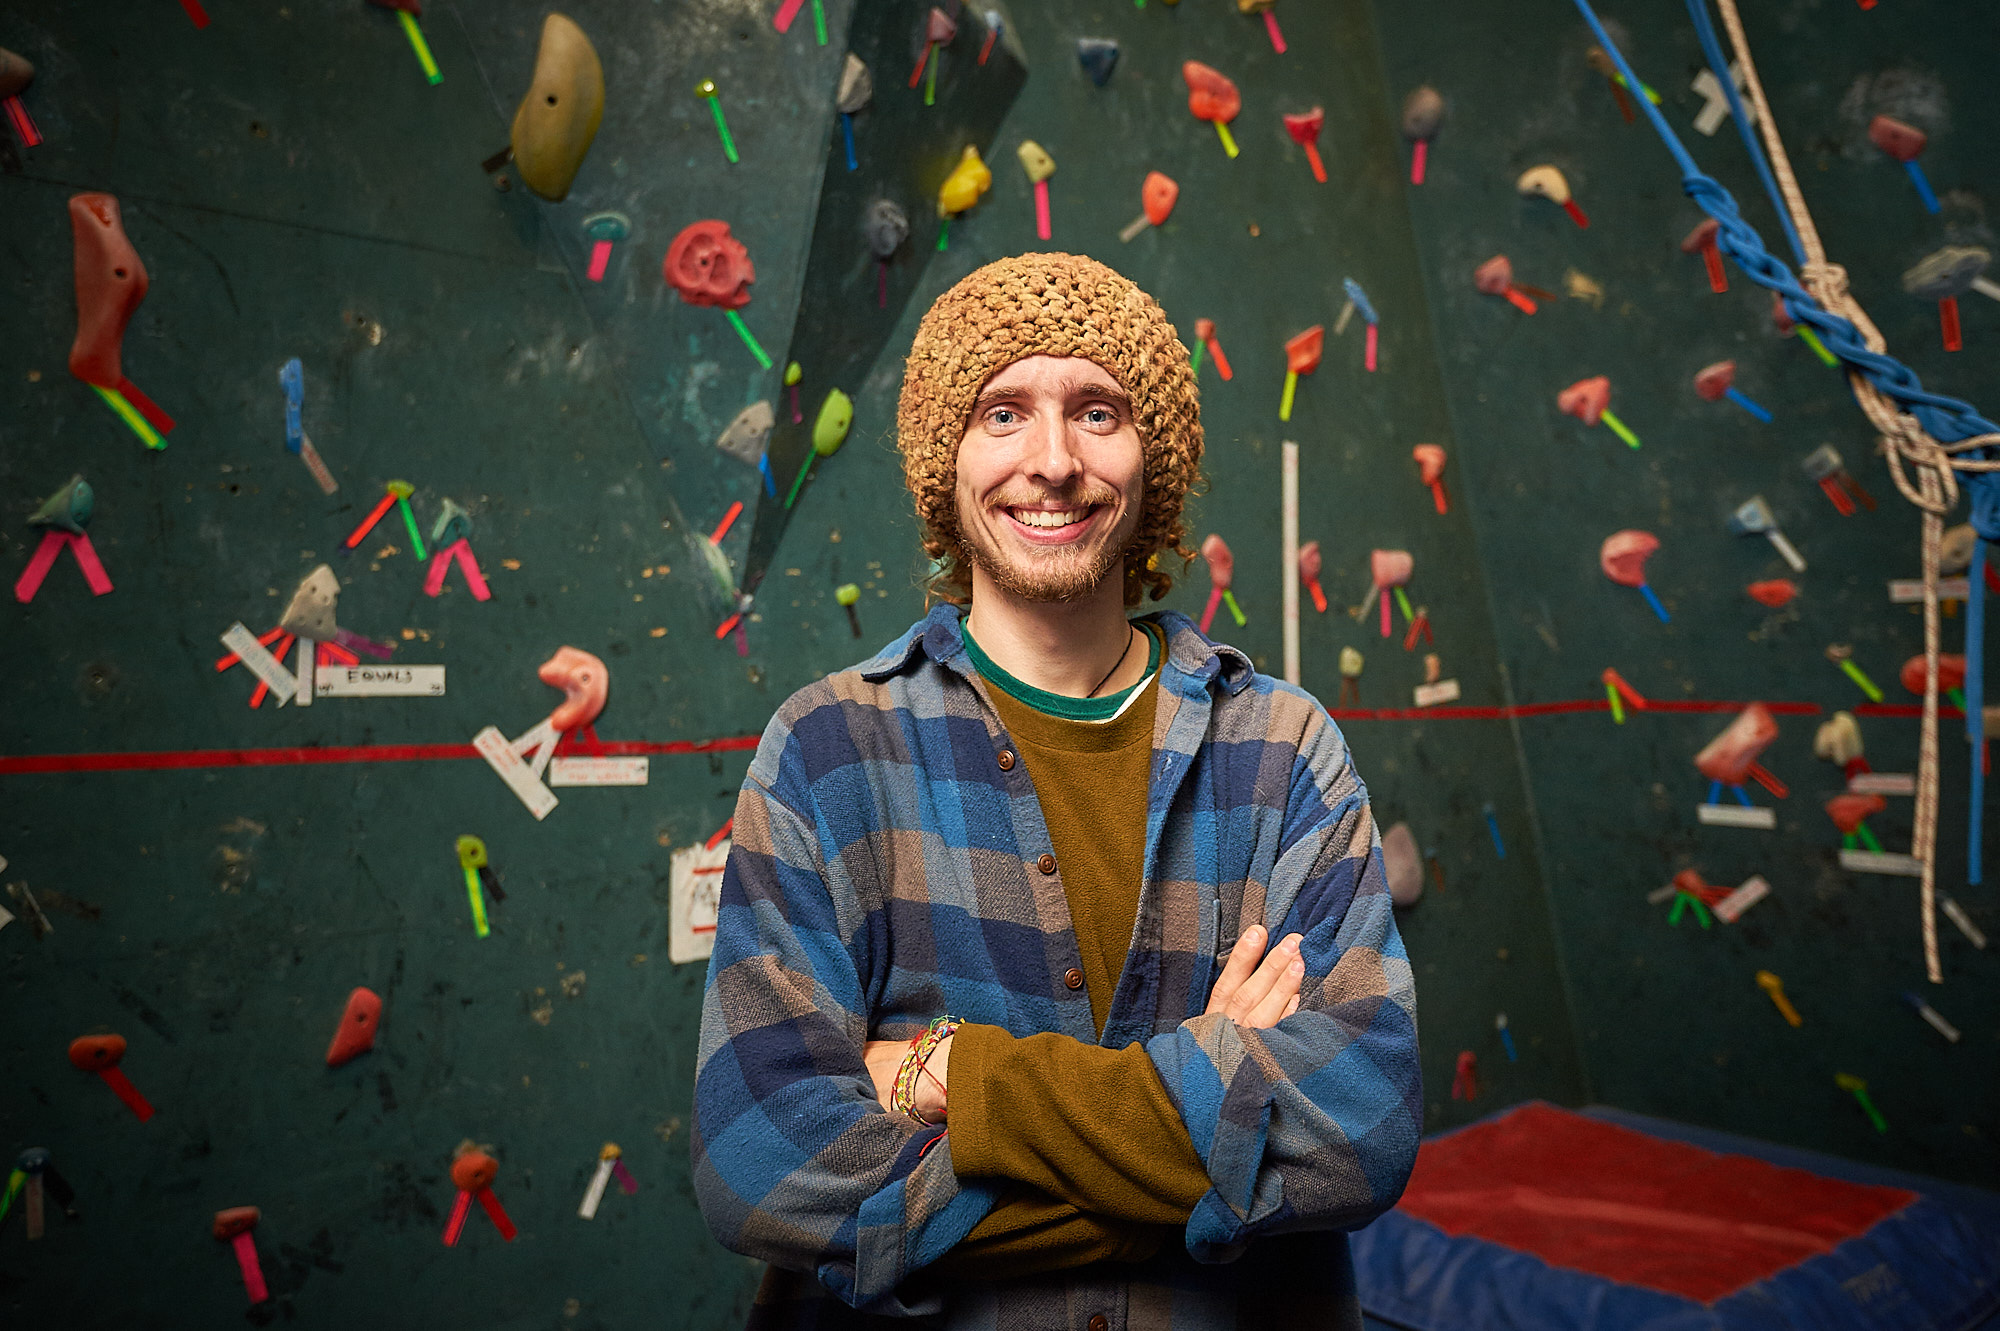 Evan Chartier, Colgate Class of 2014, photographed at the Angert Family Climbing Wall on the Colgate University Campus